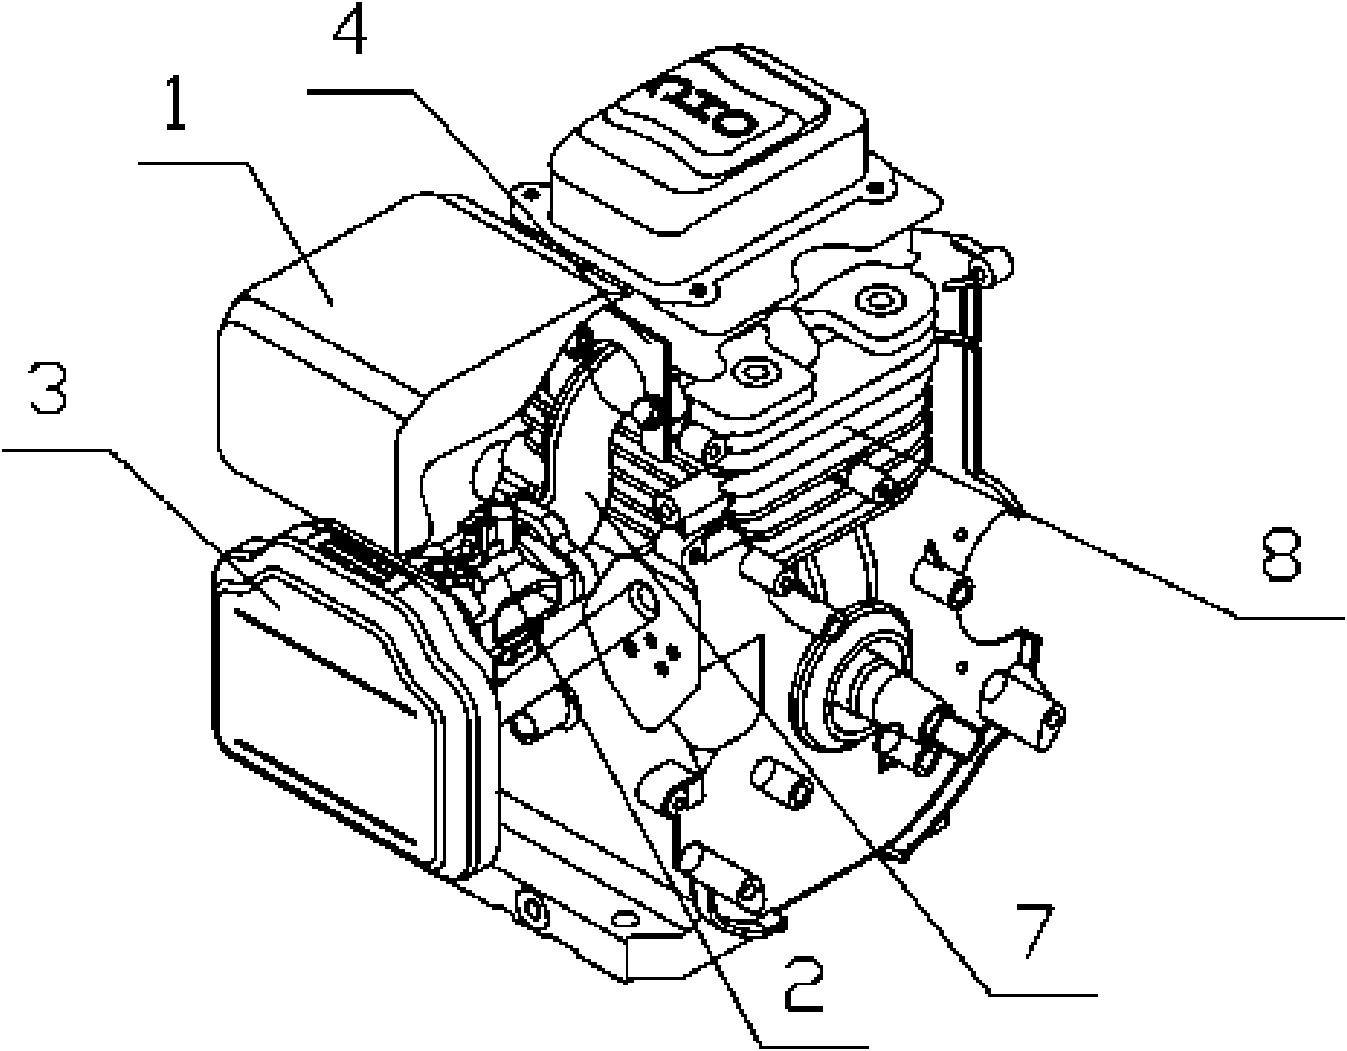 Fuel supply structure for general gasoline engines